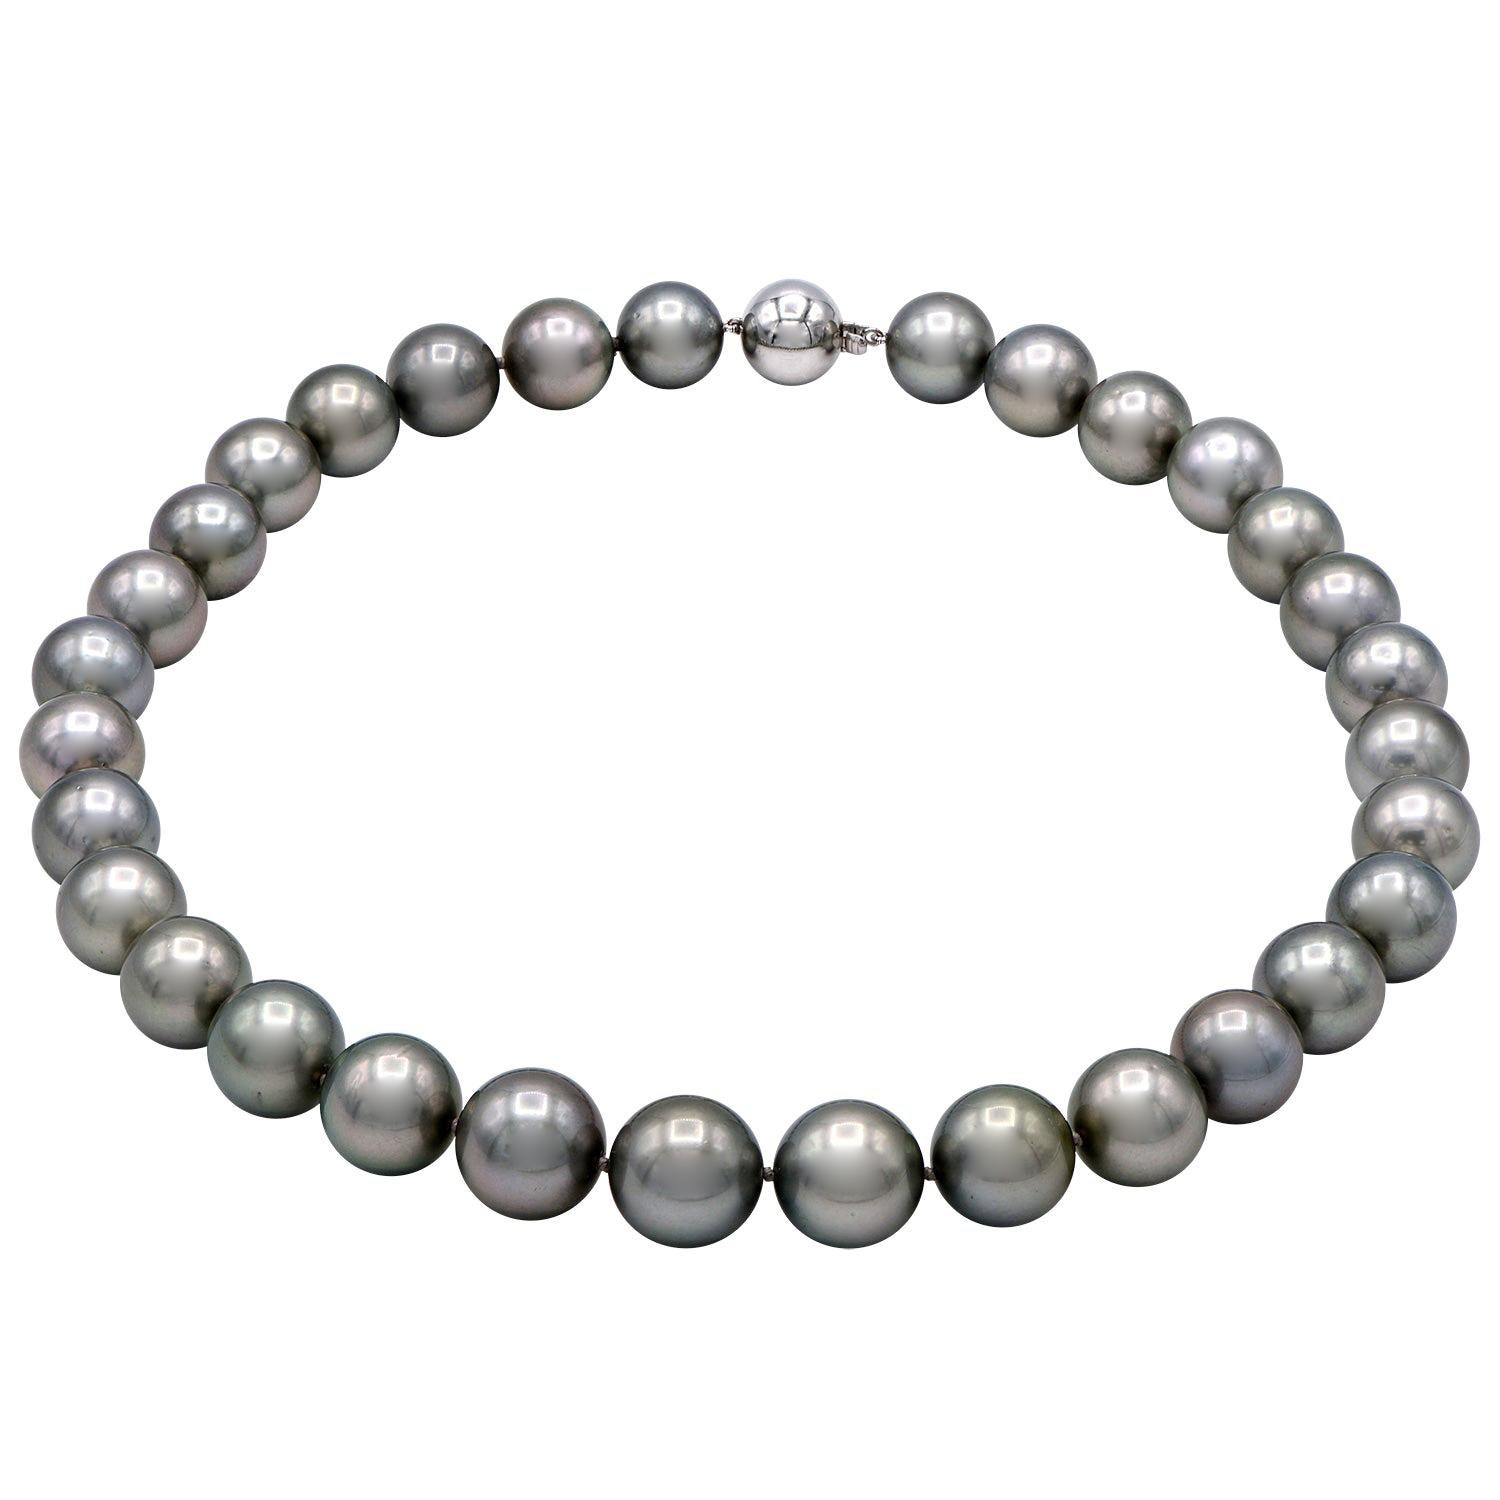 Silver Tahitian Pearl Necklace with 14 Karat White Gold Clasp